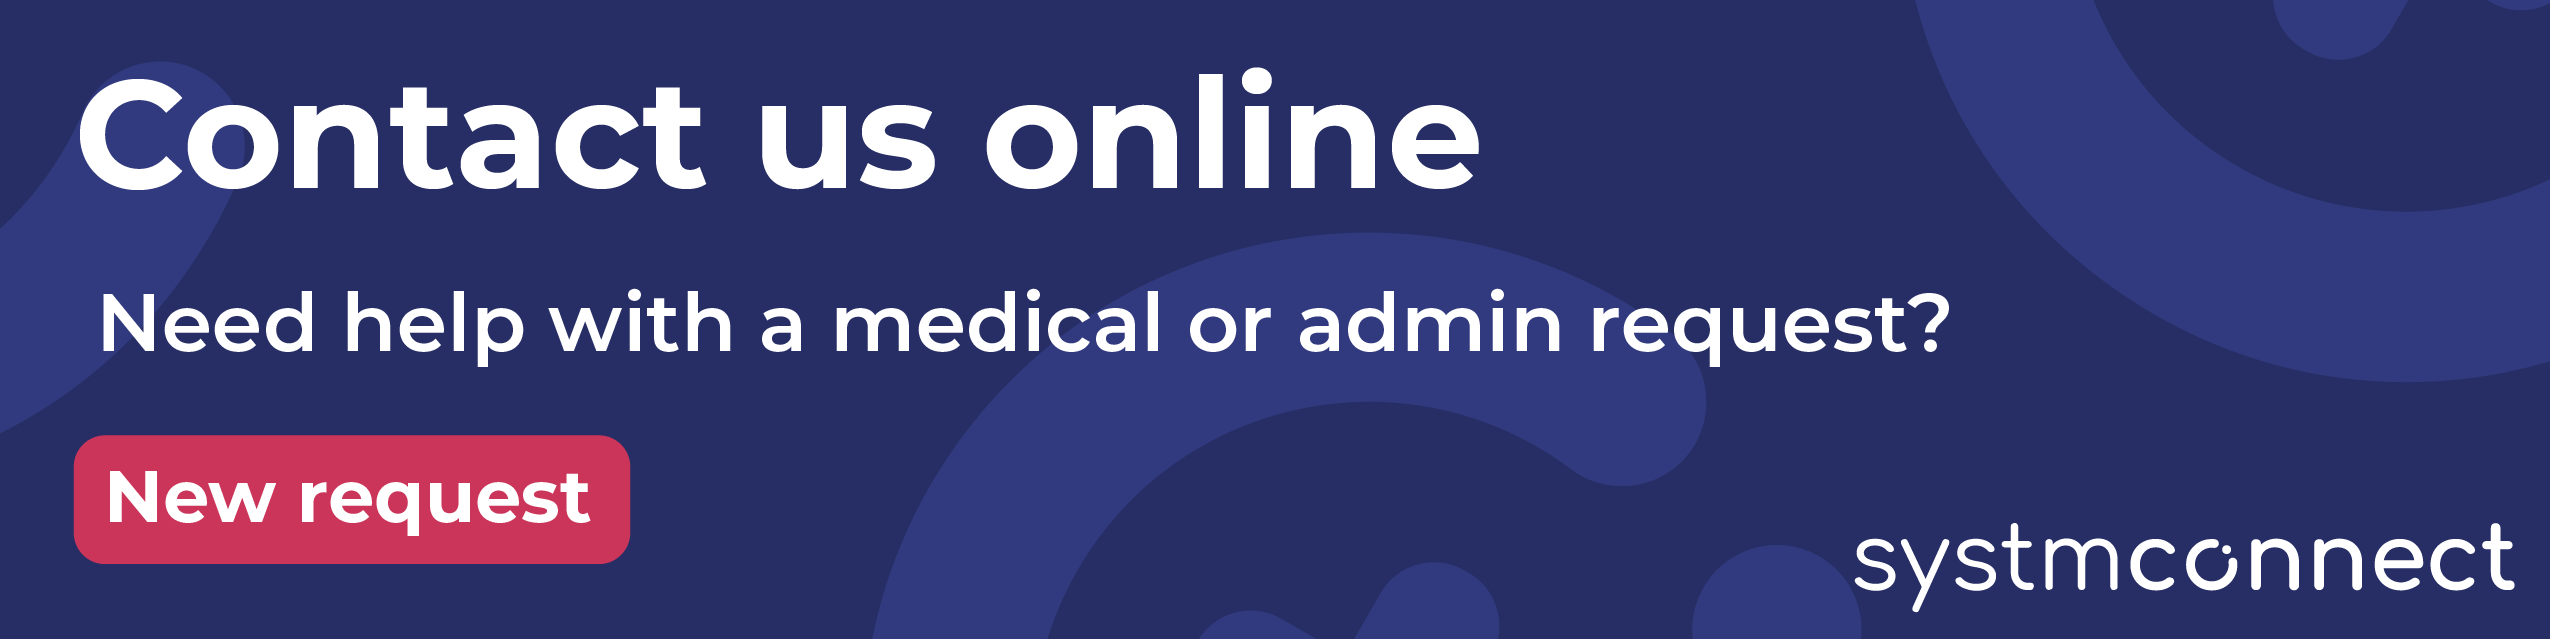 Contact us online. Need help with a medical or admin request? Submit a new request